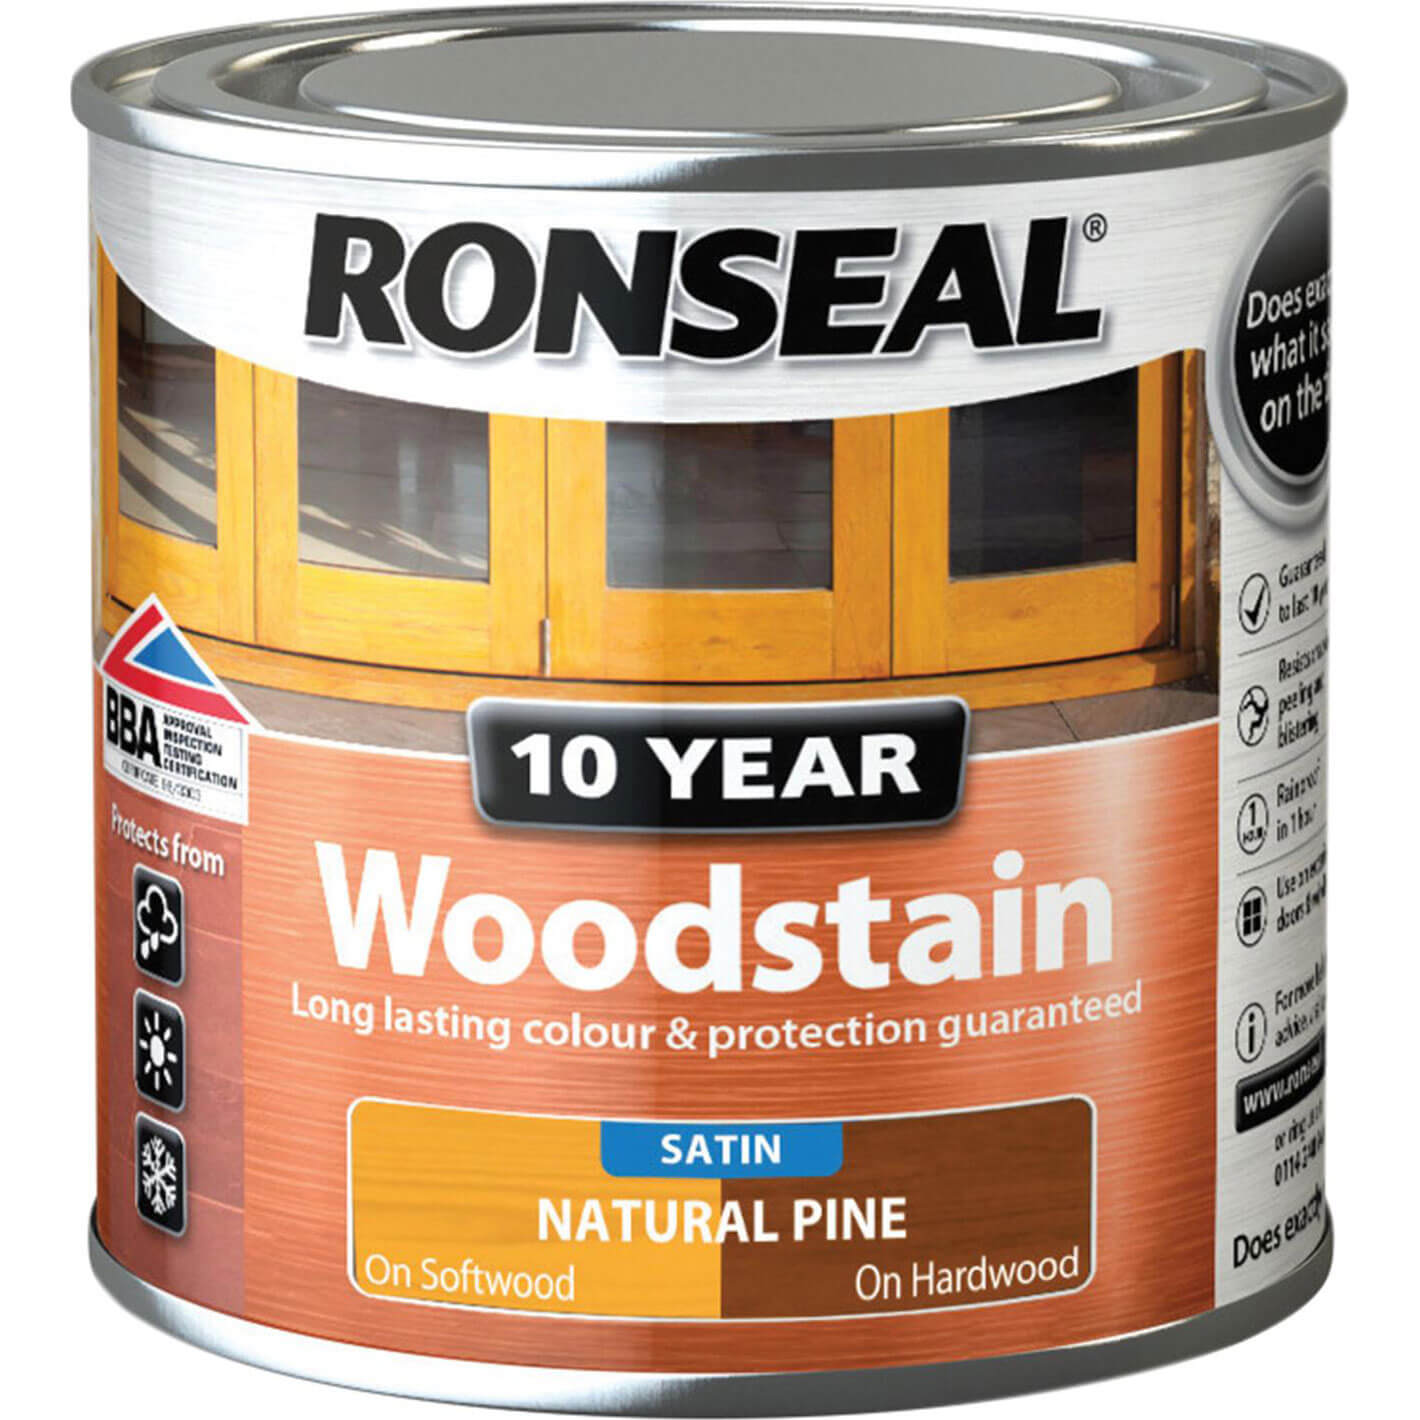 Image of Ronseal 10 Year Wood Stain Natural Pine 250ml